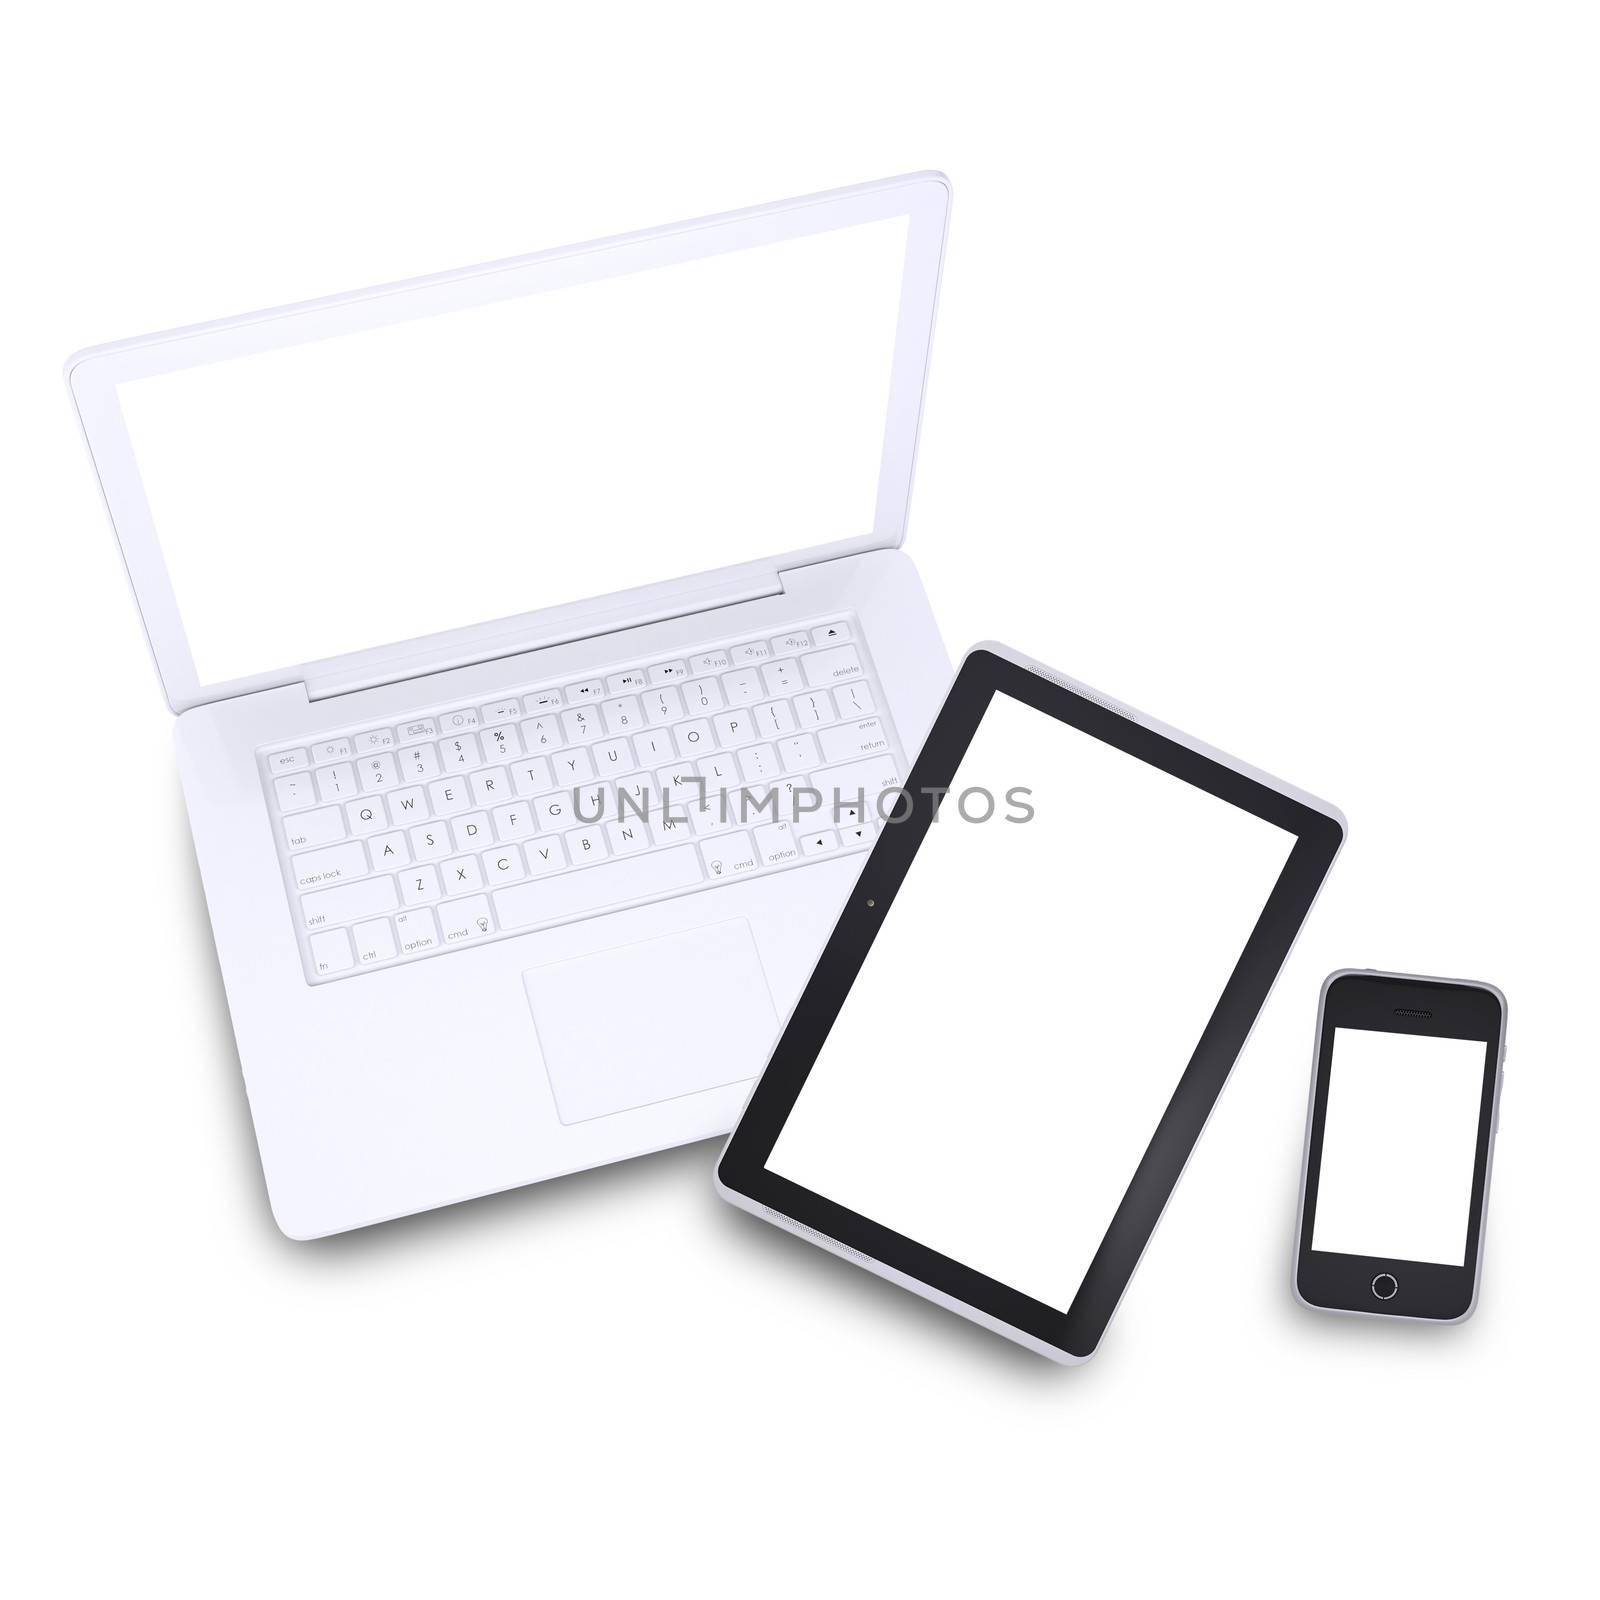 Laptop, tablet pc and smartphone by cherezoff